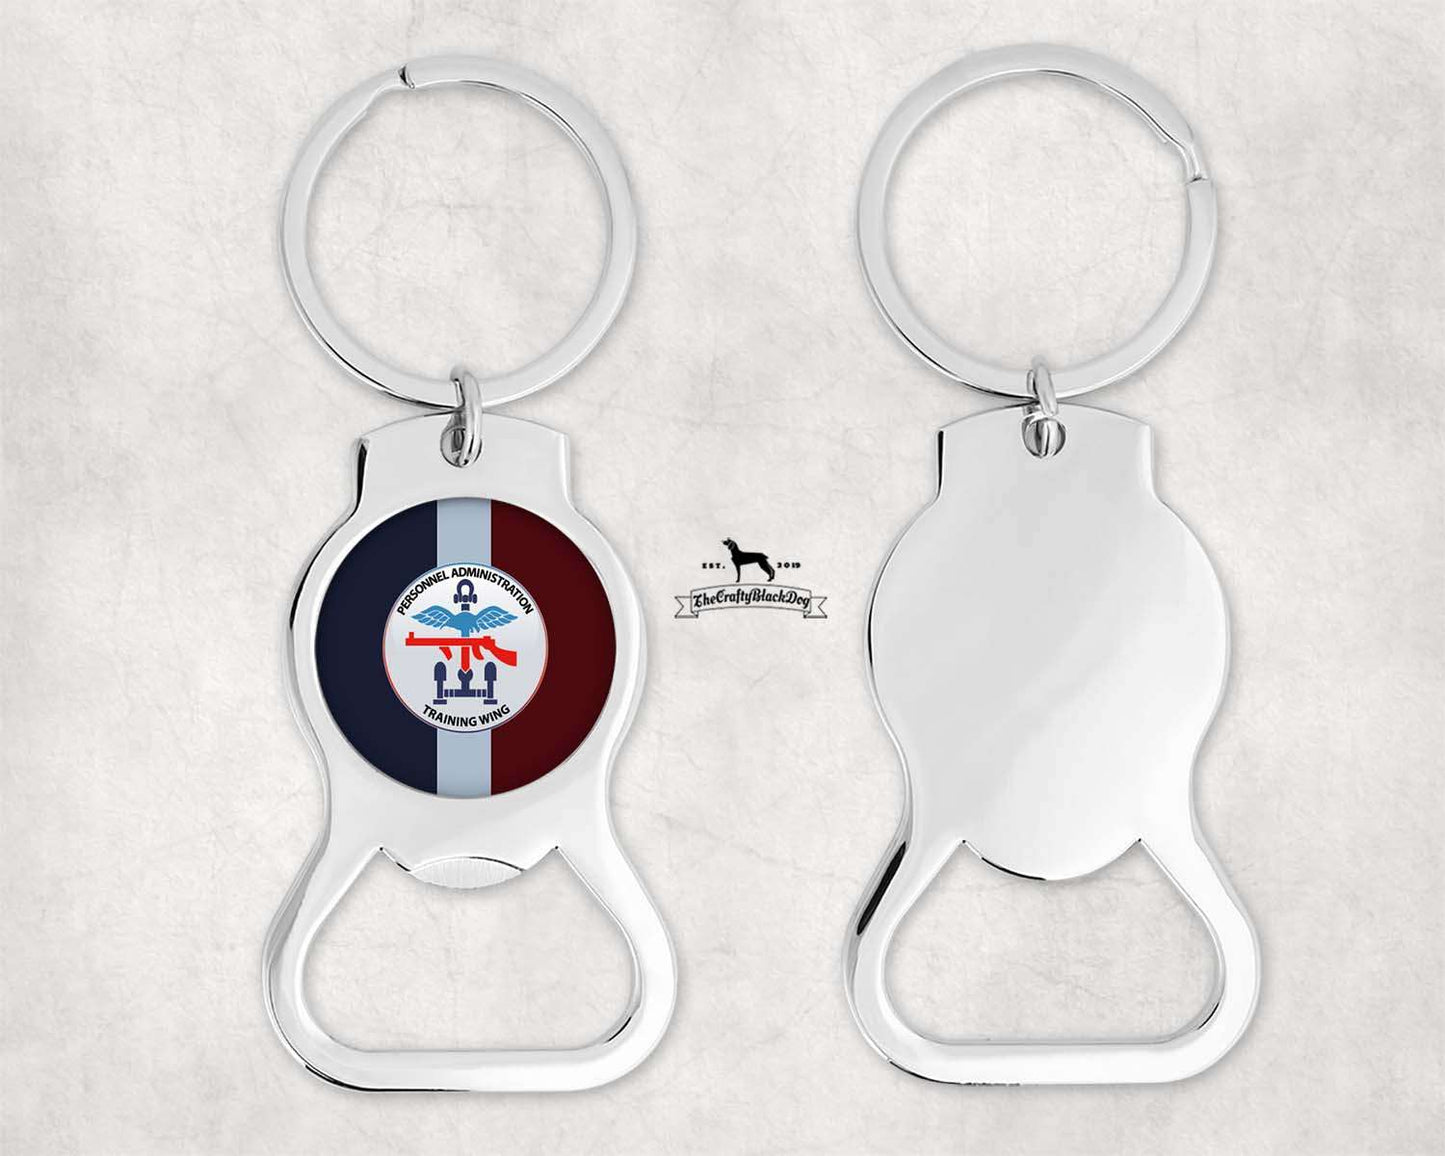 Personnel Administration Training Wing (PATW Worthy Down) - Bottle Opener Keyring